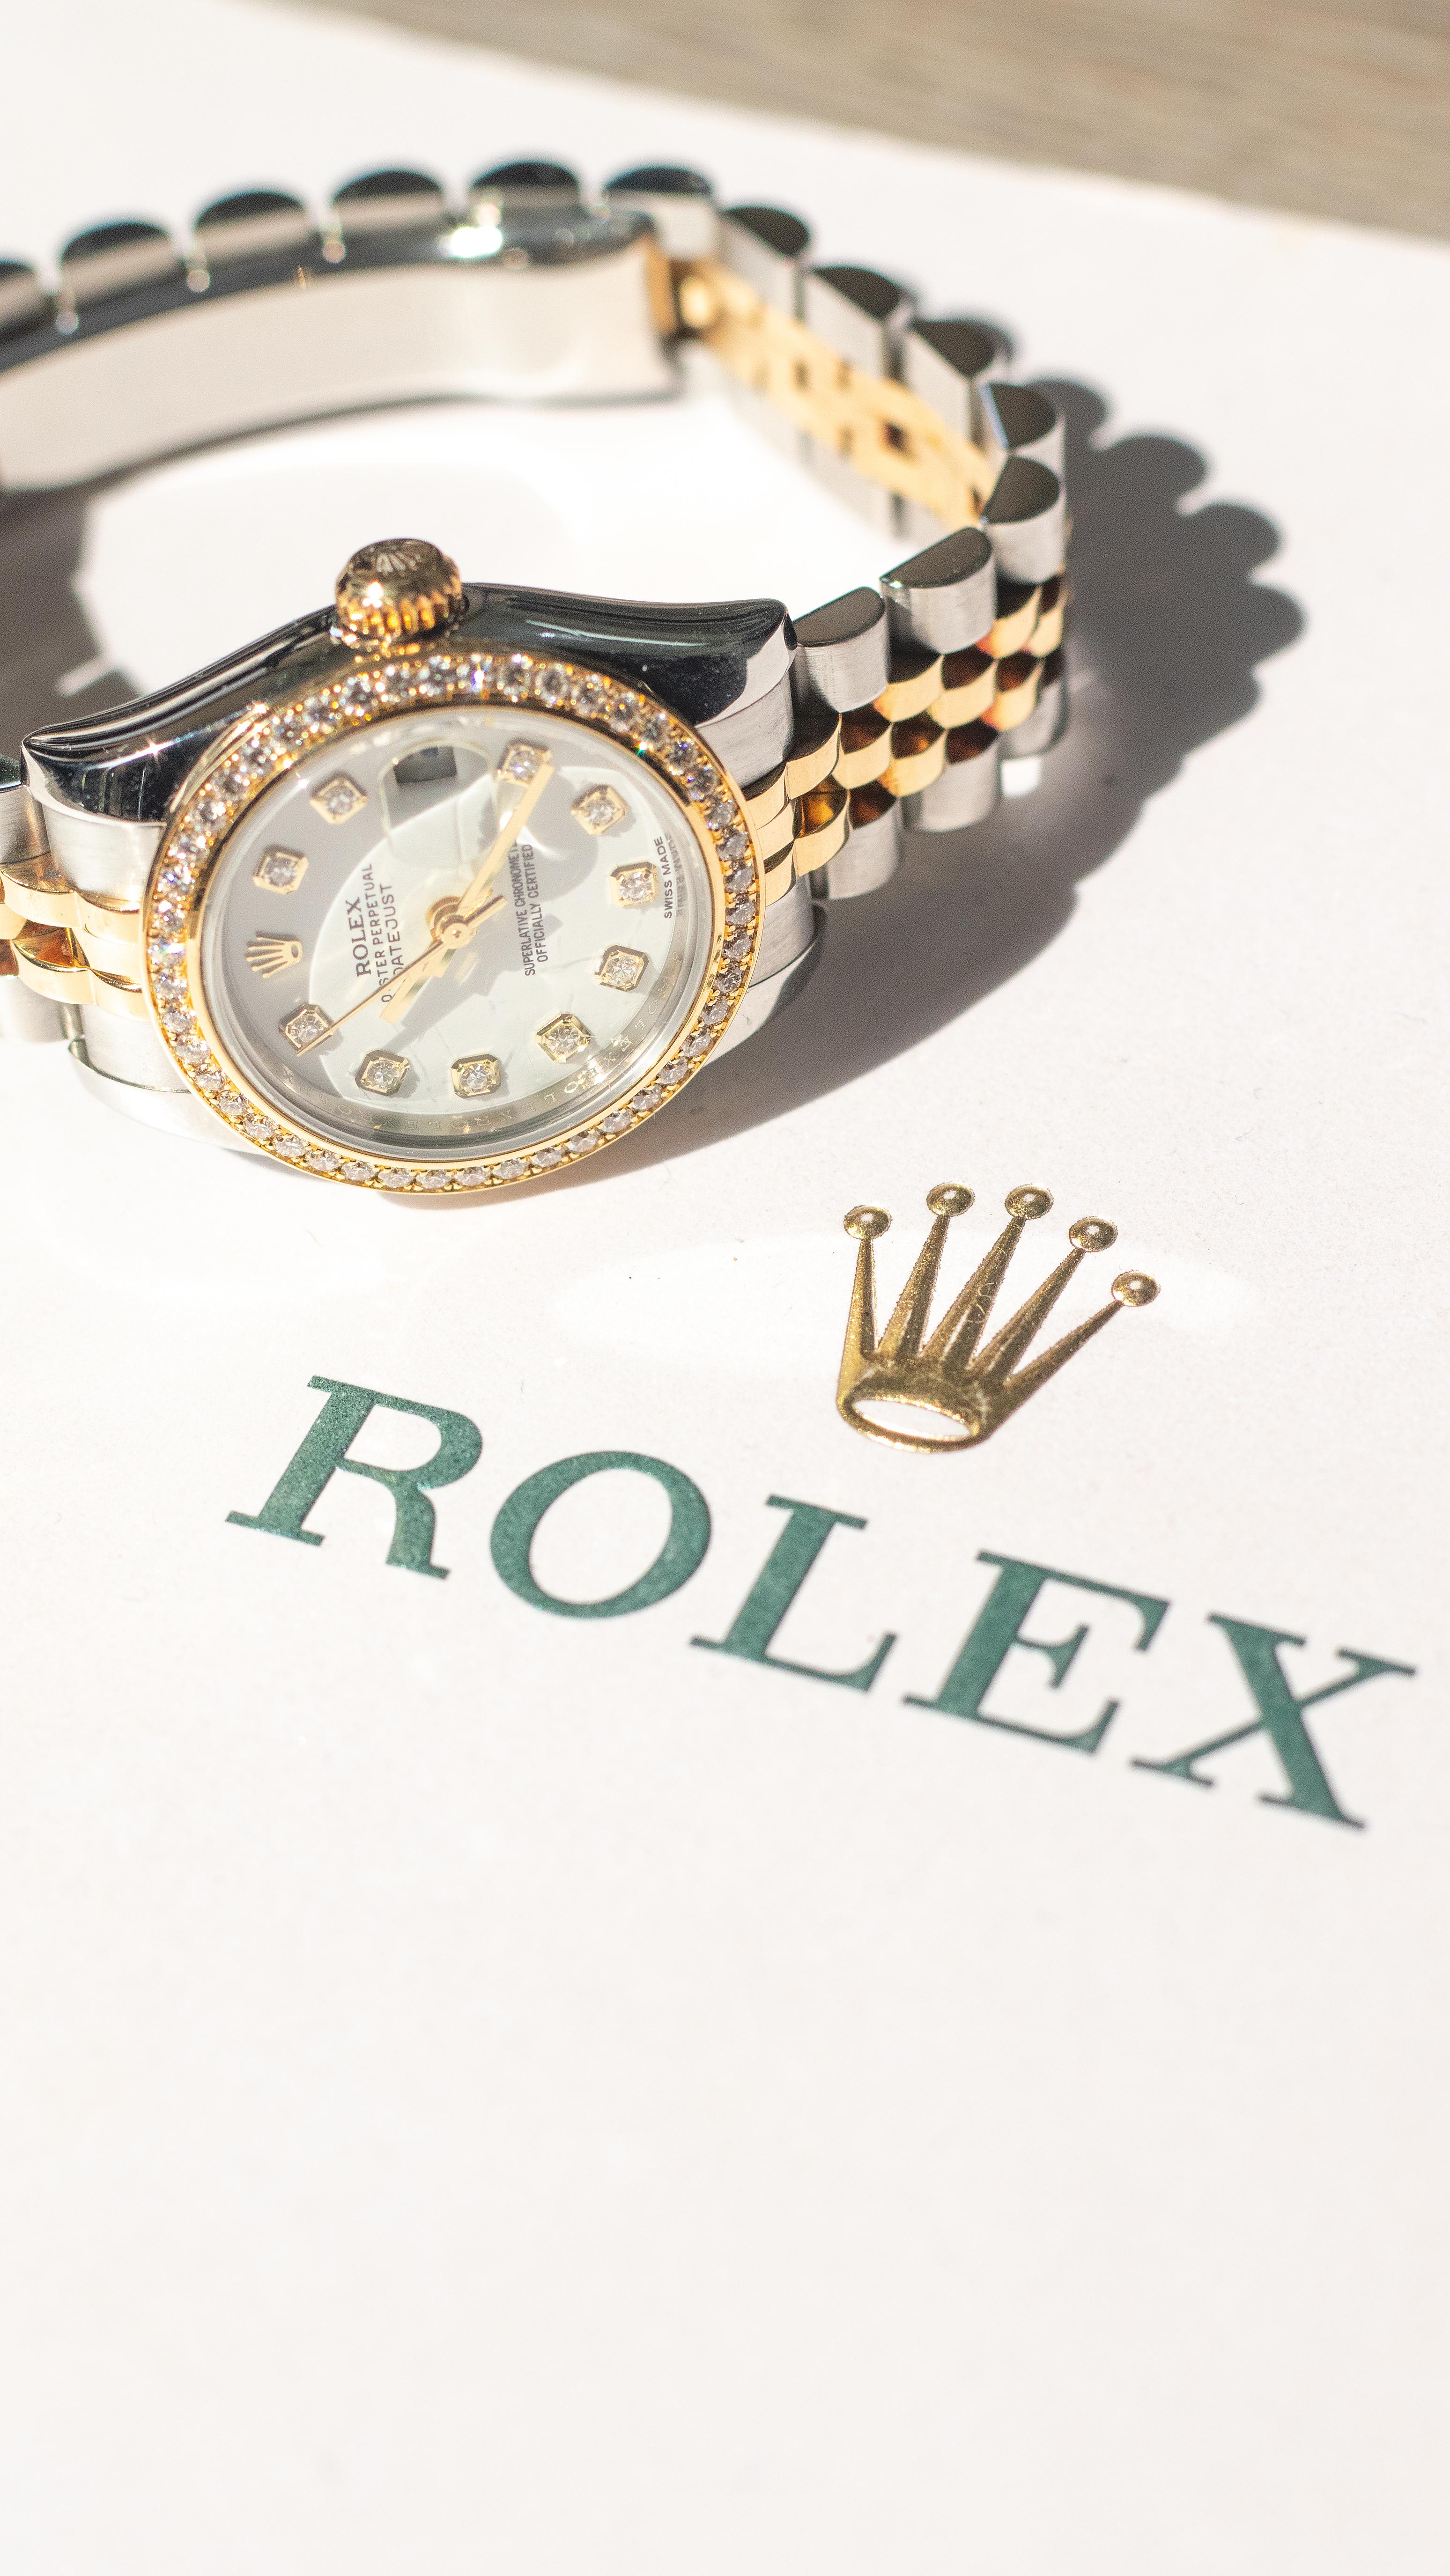 Rolex 179383 Datejust 26mm Two Tone Ladies Watch In Excellent Condition For Sale In Boca Raton, FL